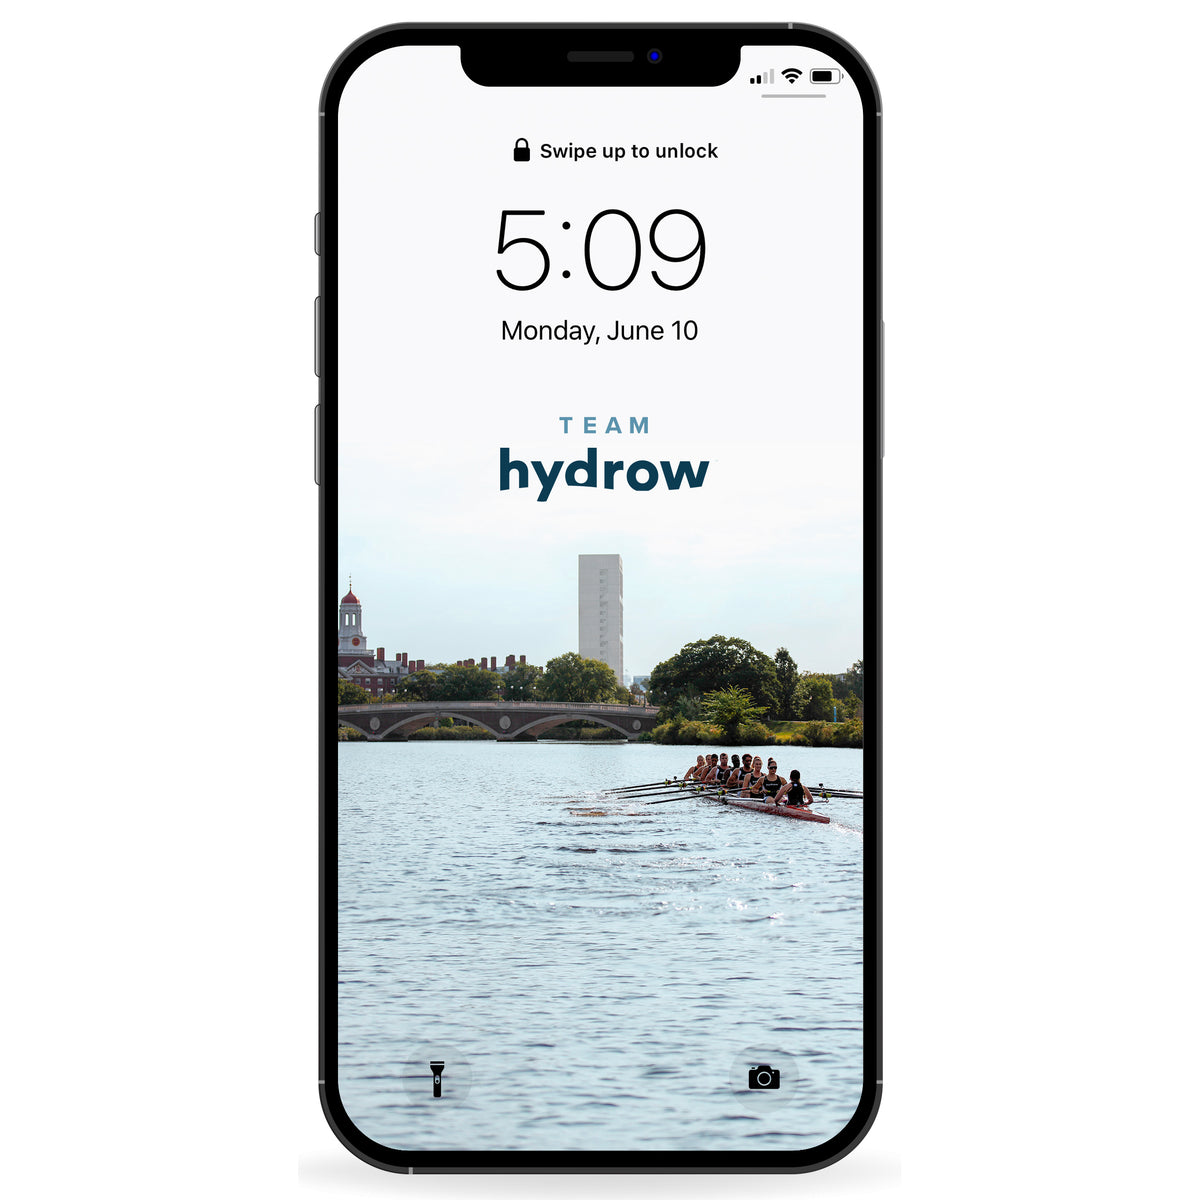 phone background featuring image of crew rowing in river and text &quot;TEAM hydrow&quot;